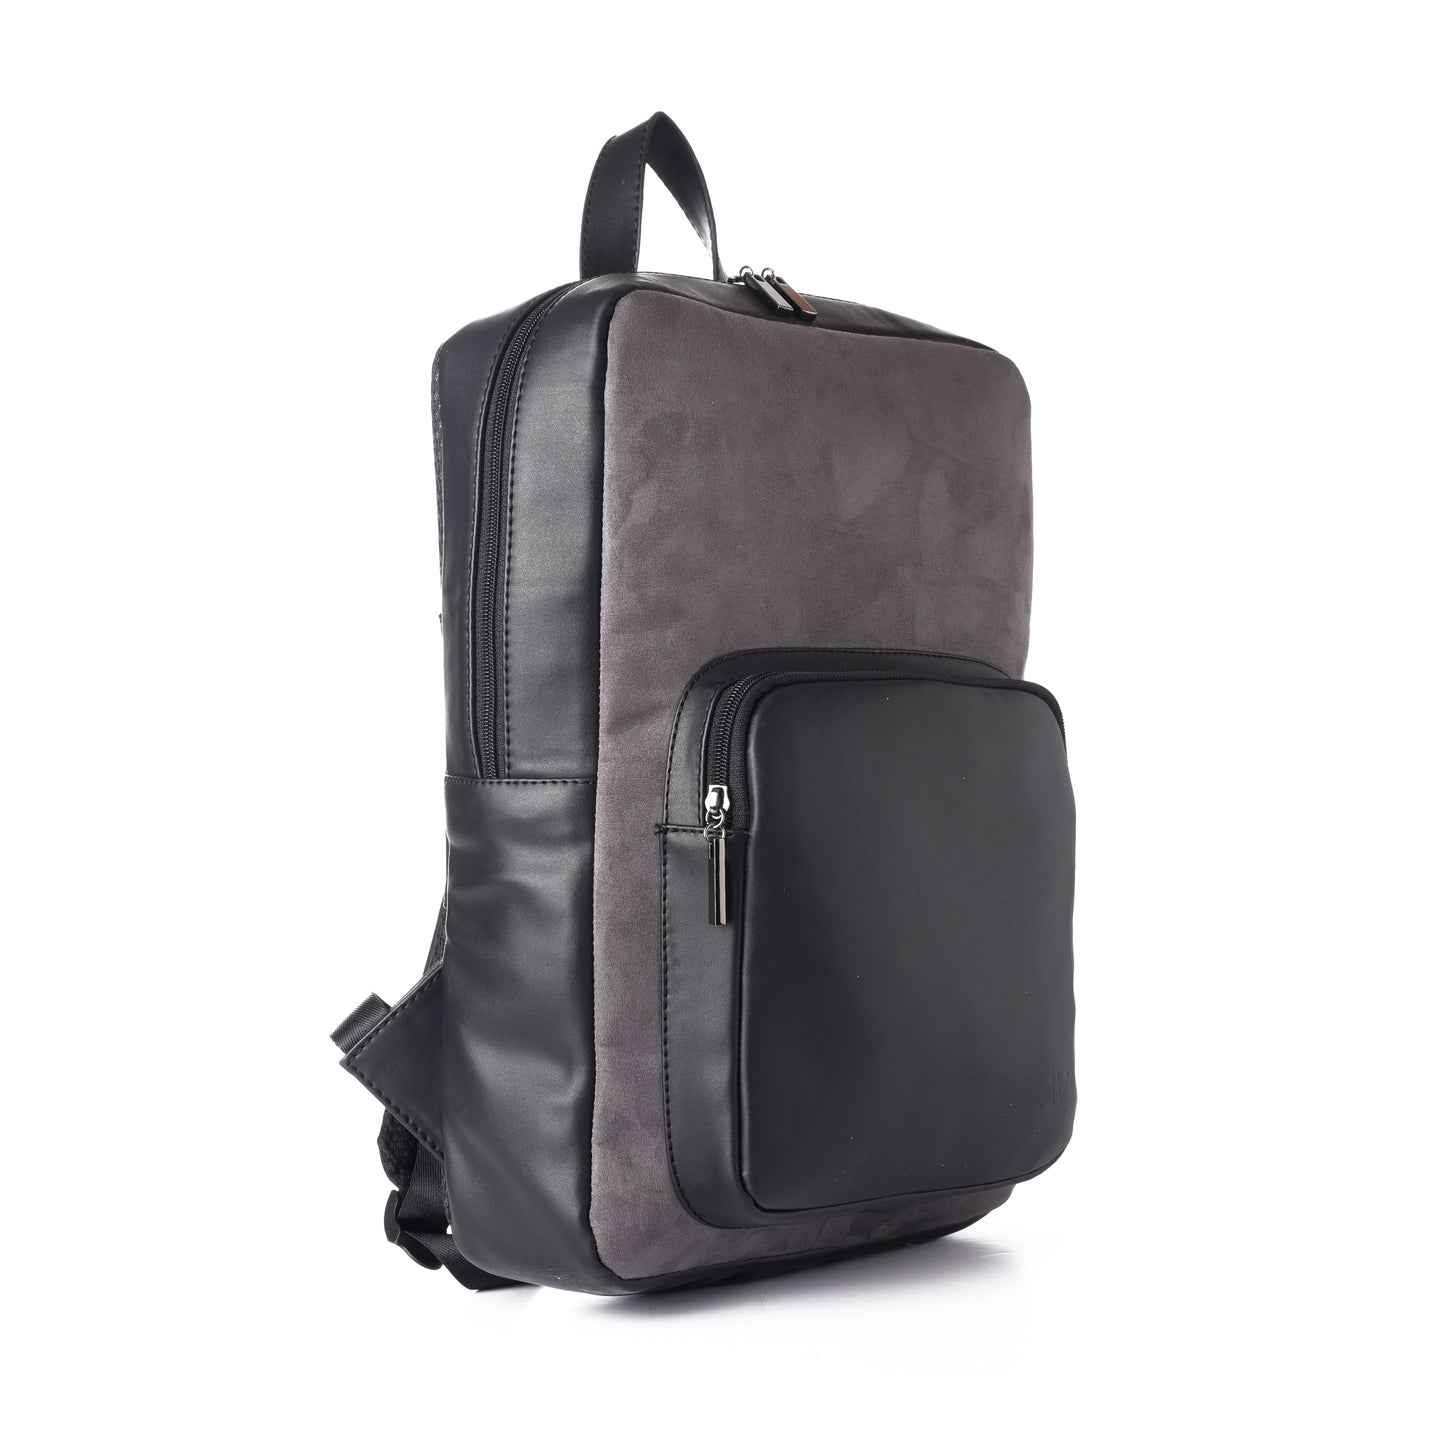 Laptop black with grey suede Backpack